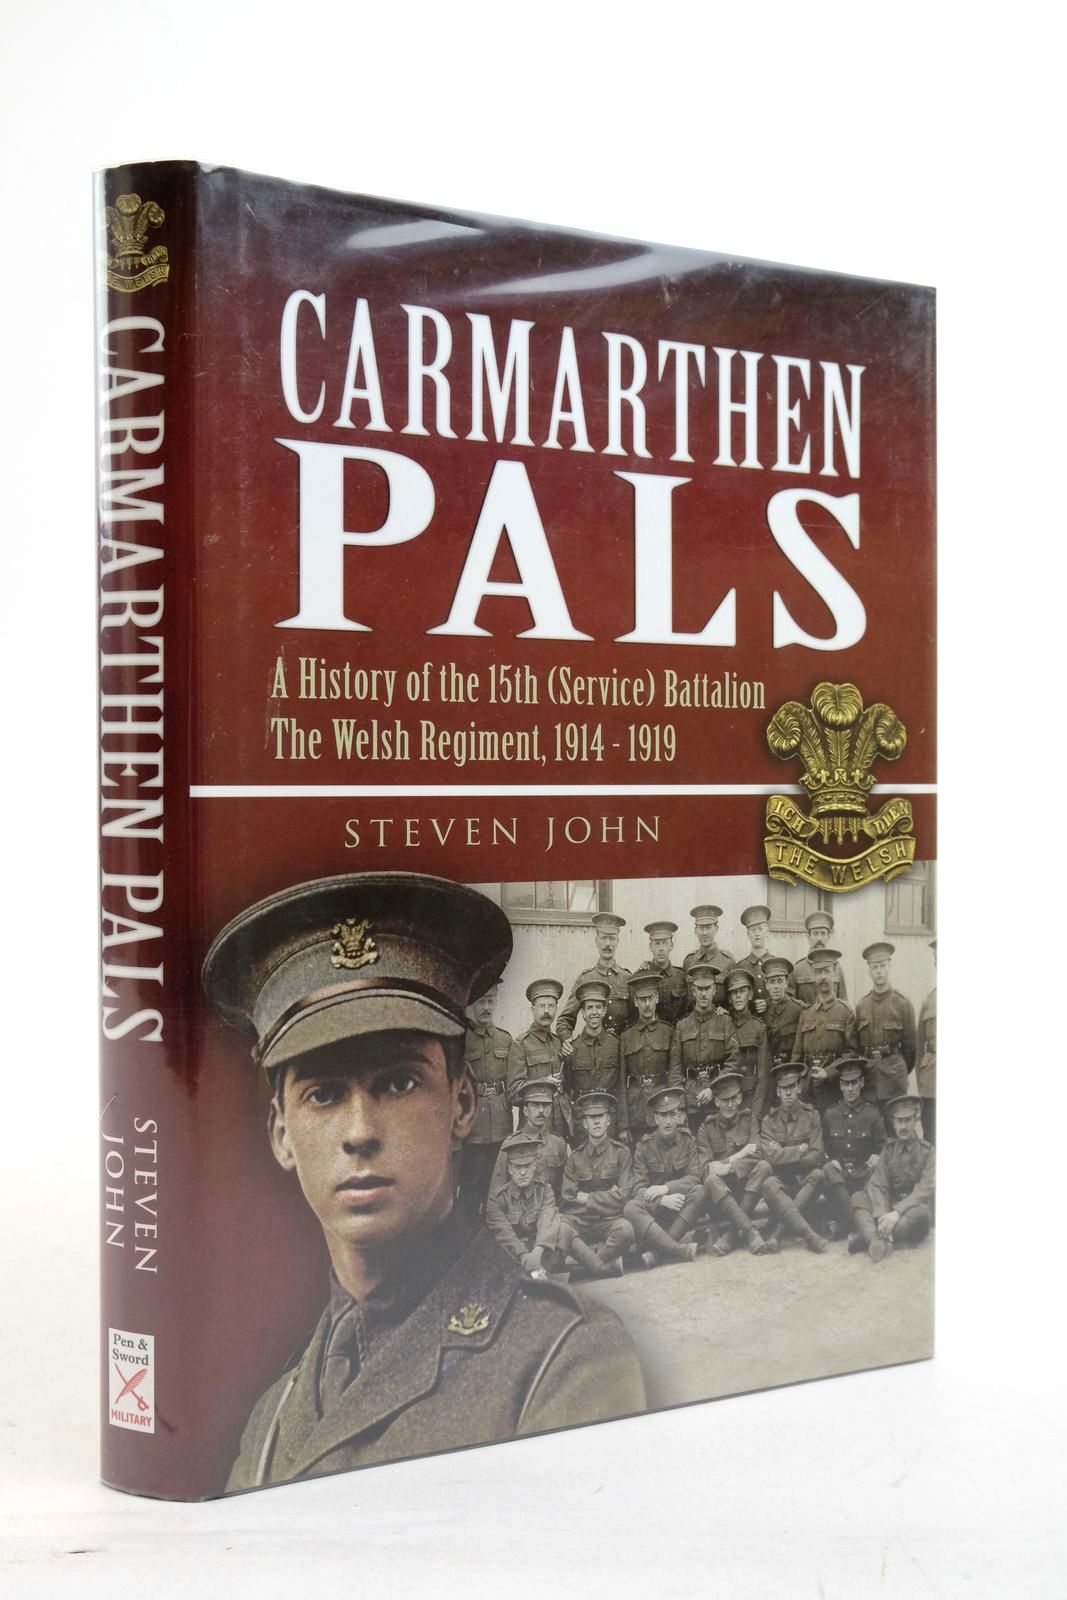 Photo of CARMARTHEN PALS: A HISTORY OF THE 15TH (SERVICE) BATTALION THE WELSH REGIMENT, 1914 - 1919- Stock Number: 2138336